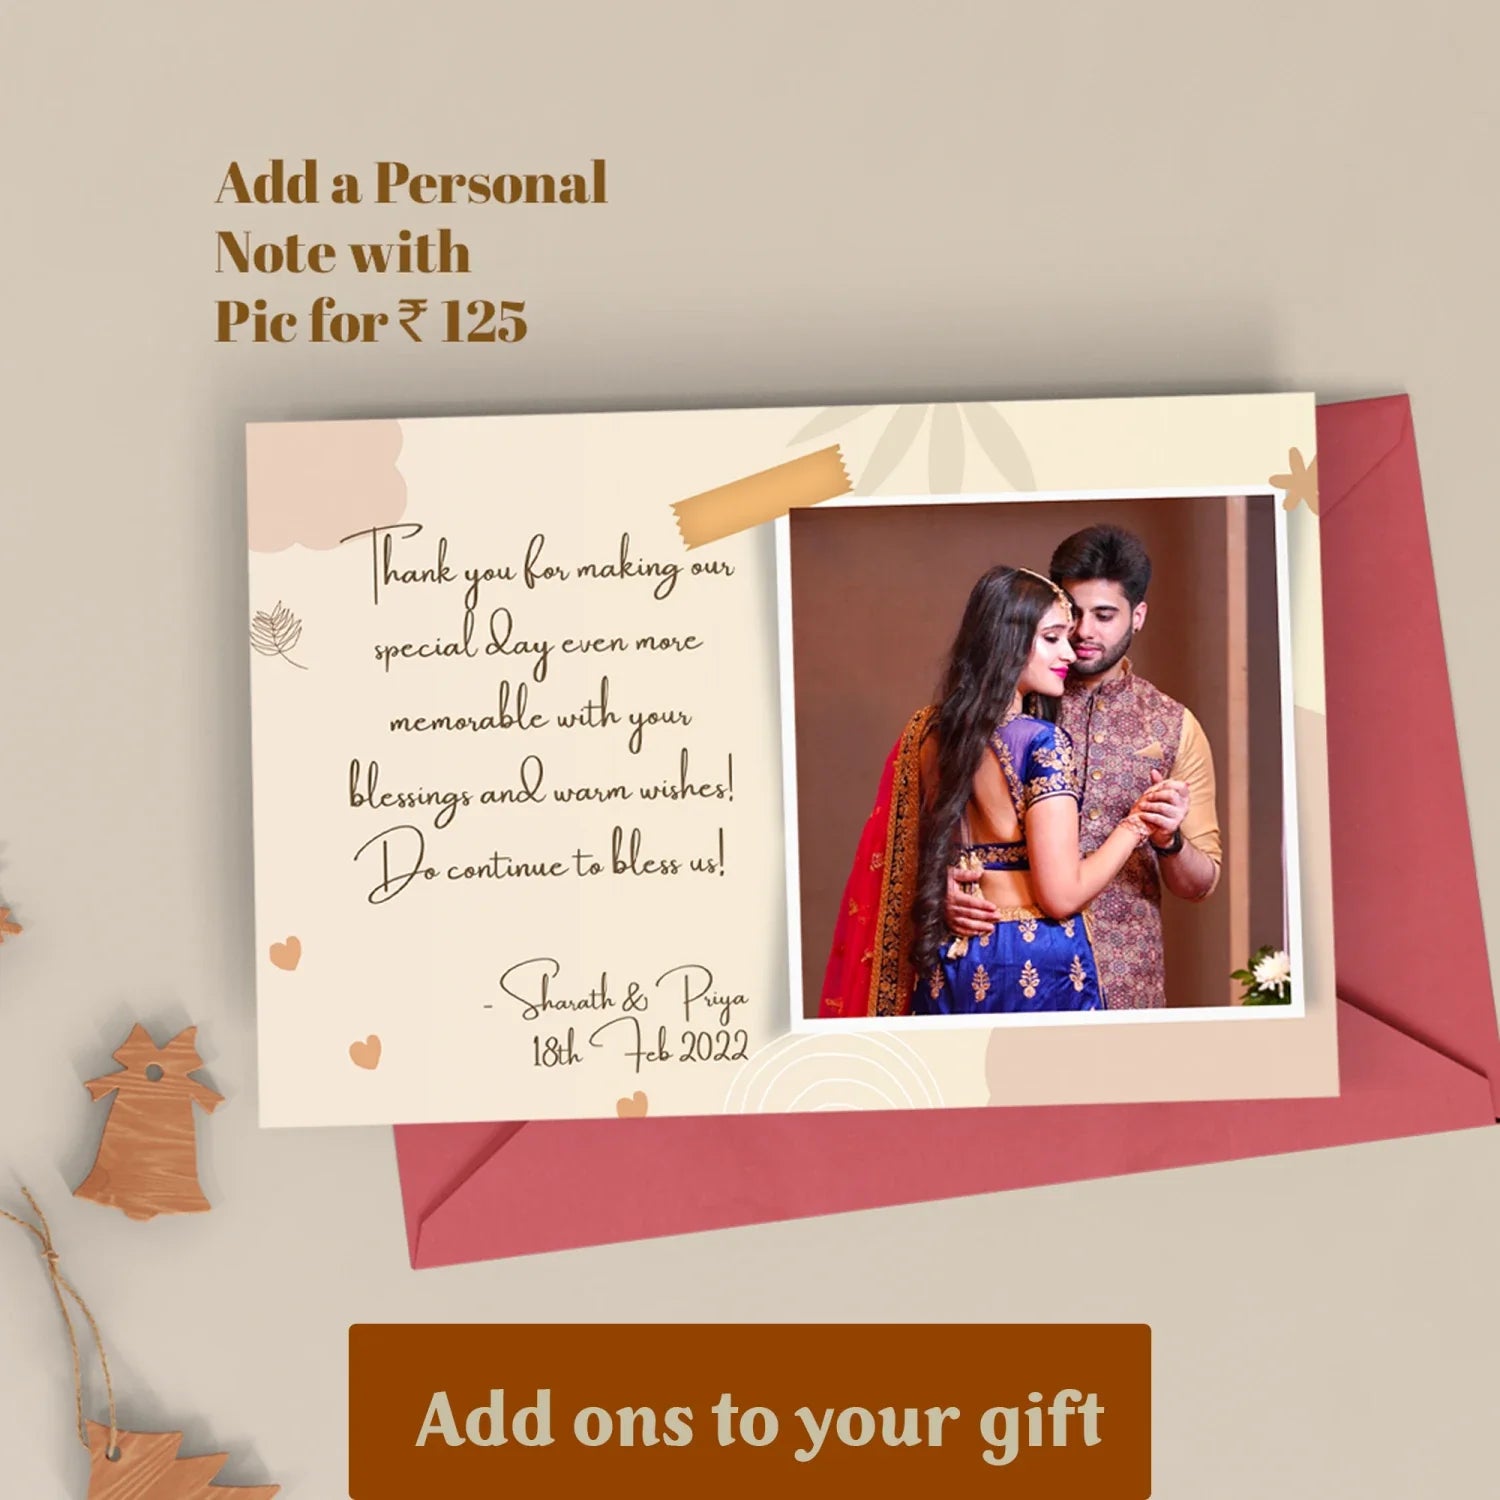 Personalized Men's Combo (2 pcs) - BrownAdd your personal note and polaroid picture to customise the gifts and give it a personal touch.